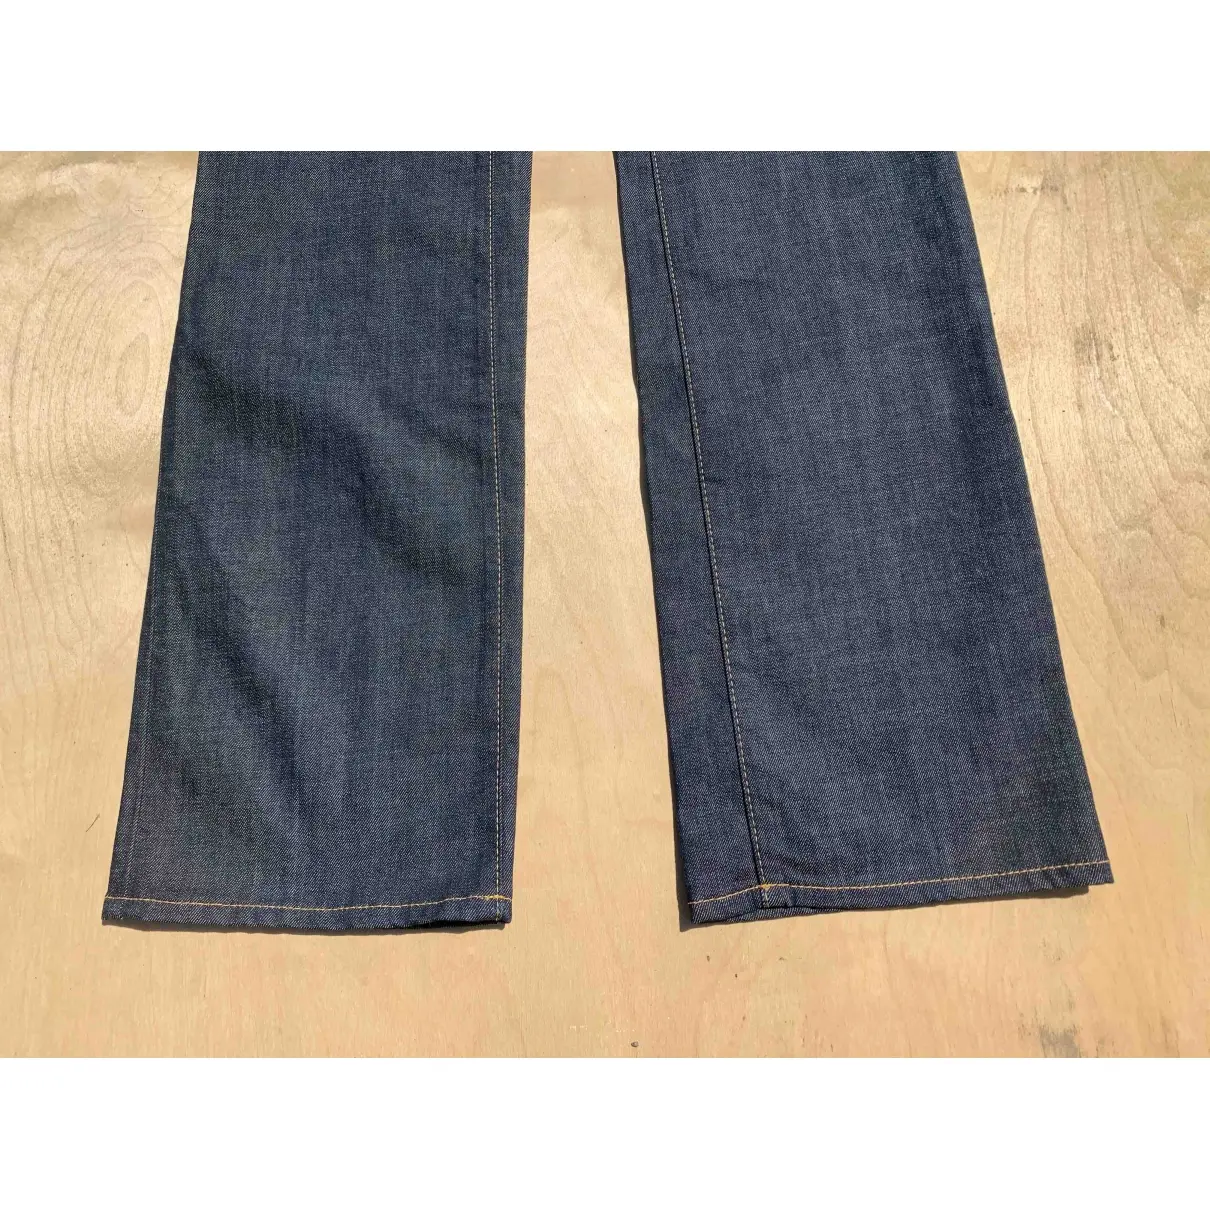 Buy Dsquared2 Bootcut jeans online